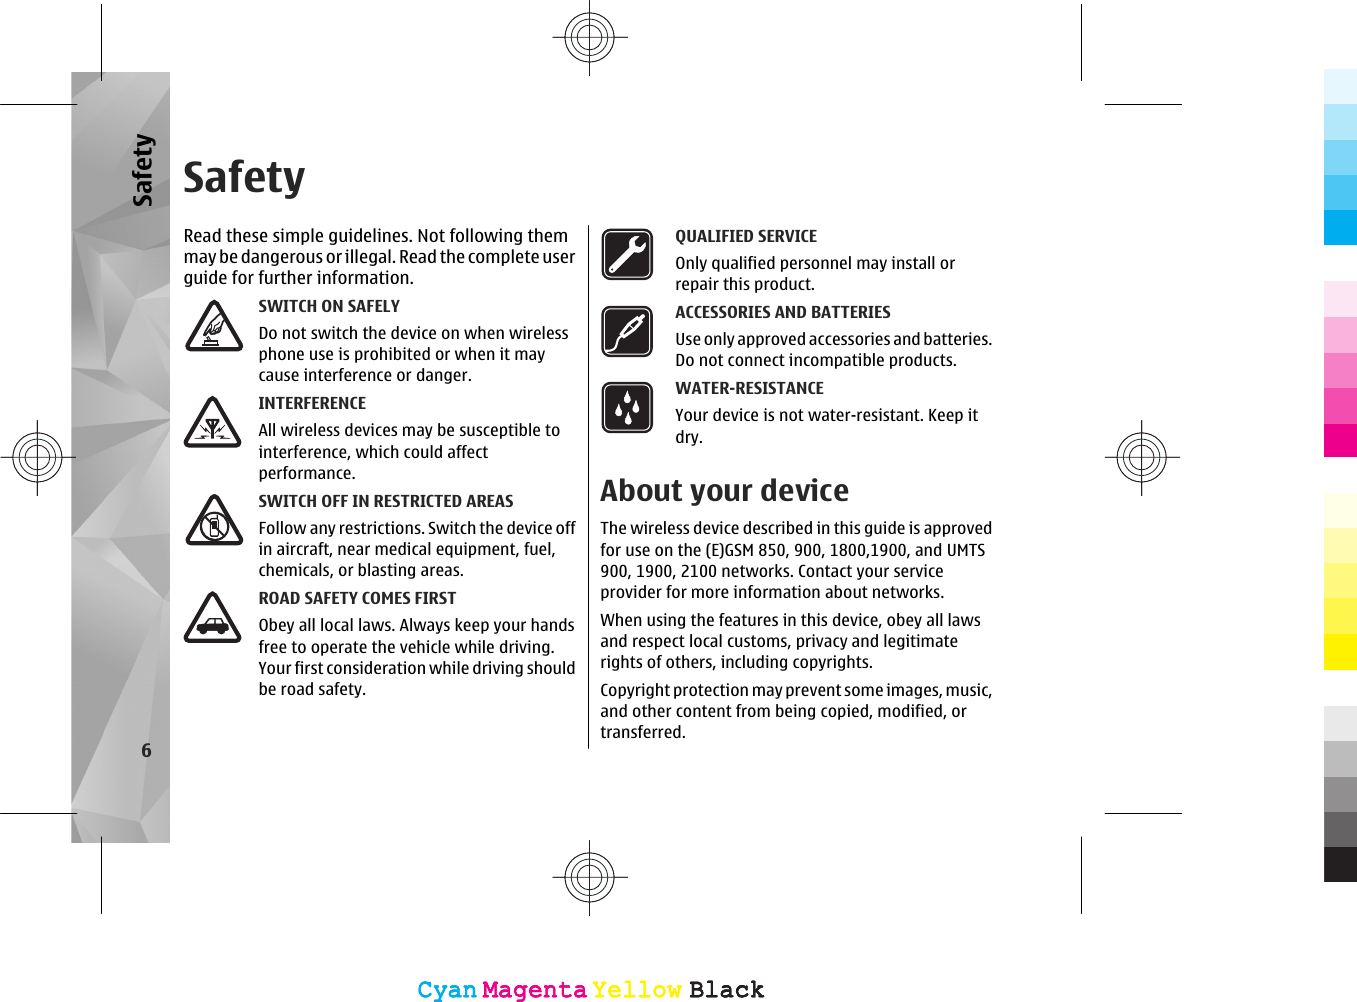 SafetyRead these simple guidelines. Not following themmay be dangerous or illegal. Read the co mplete userguide for further information.SWITCH ON SAFELYDo not switch the device on when wirelessphone use is prohibited or when it maycause interference or danger.INTERFERENCEAll wireless devices may be susceptible tointerference, which could affectperformance.SWITCH OFF IN RESTRICTED AREASFollow any restrictions. Switch the device offin aircraft, near medical equipment, fuel,chemicals, or blasting areas.ROAD SAFETY COMES FIRSTObey all local laws. Always keep your handsfree to operate the vehicle while driving.Your first consideration while driving shouldbe road safety.QUALIFIED SERVICEOnly qualified personnel may install orrepair this product.ACCESSORIES AND BATTERIESUse only approved accessories and batteries.Do not connect incompatible products.WATER-RESISTANCEYour device is not water-resistant. Keep itdry.About your deviceThe wireless device described in this guide is approvedfor use on the (E)GSM 850, 900, 1800,1900, and UMTS900, 1900, 2100 networks. Contact your serviceprovider for more information about networks.When using the features in this device, obey all lawsand respect local customs, privacy and legitimaterights of others, including copyrights.Copyright protection may prevent some images, music,and other content from being copied, modified, ortransferred.6SafetyCyanCyanMagentaMagentaYellowYellowBlackBlackCyanCyanMagentaMagentaYellowYellowBlackBlack